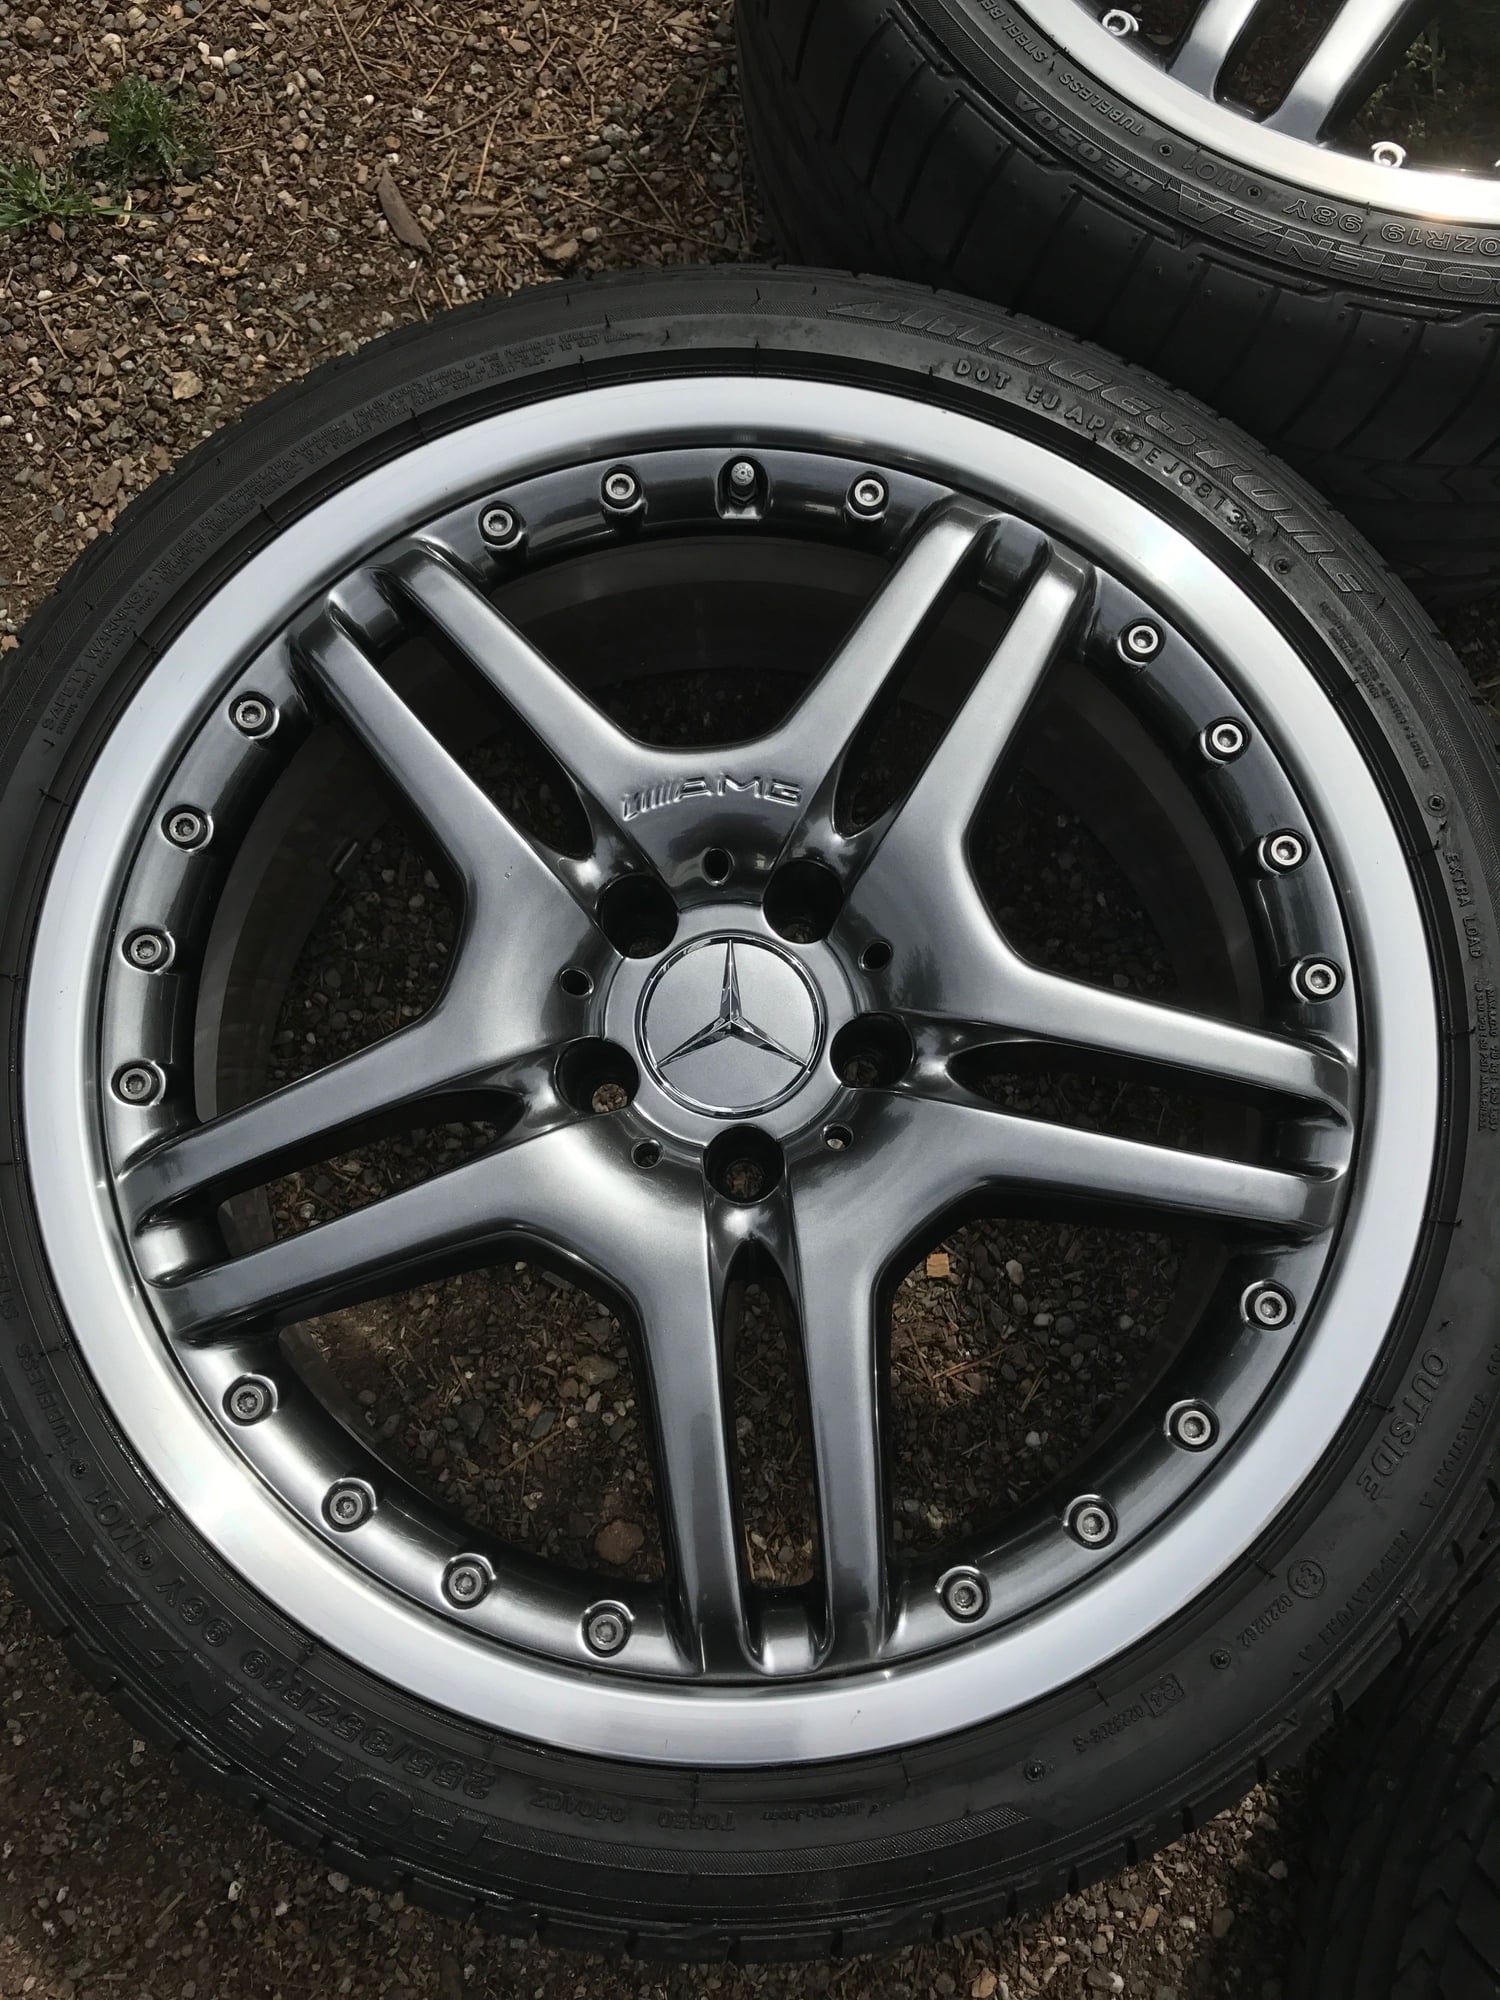 Wheels and Tires/Axles - WTB:  Set of Staggered 19" 2-Piece Wheels from 2005-2007 SL65 AMG - New - 2005 to 2007 Mercedes-Benz SL65 AMG - Los Angeles, CA 90731, United States